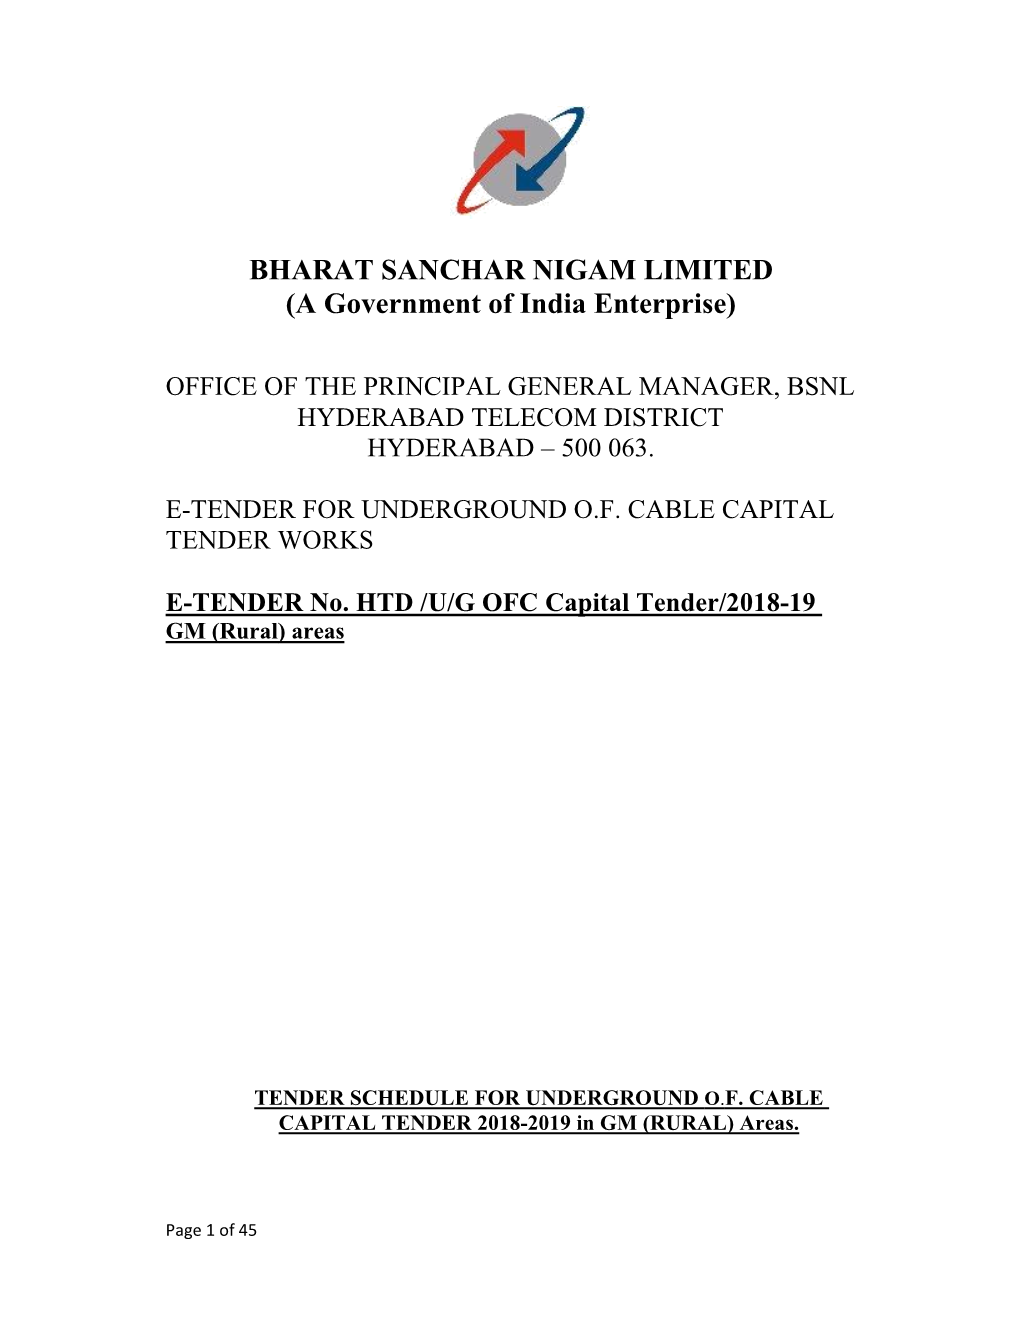 BHARAT SANCHAR NIGAM LIMITED (A Government of India Enterprise)